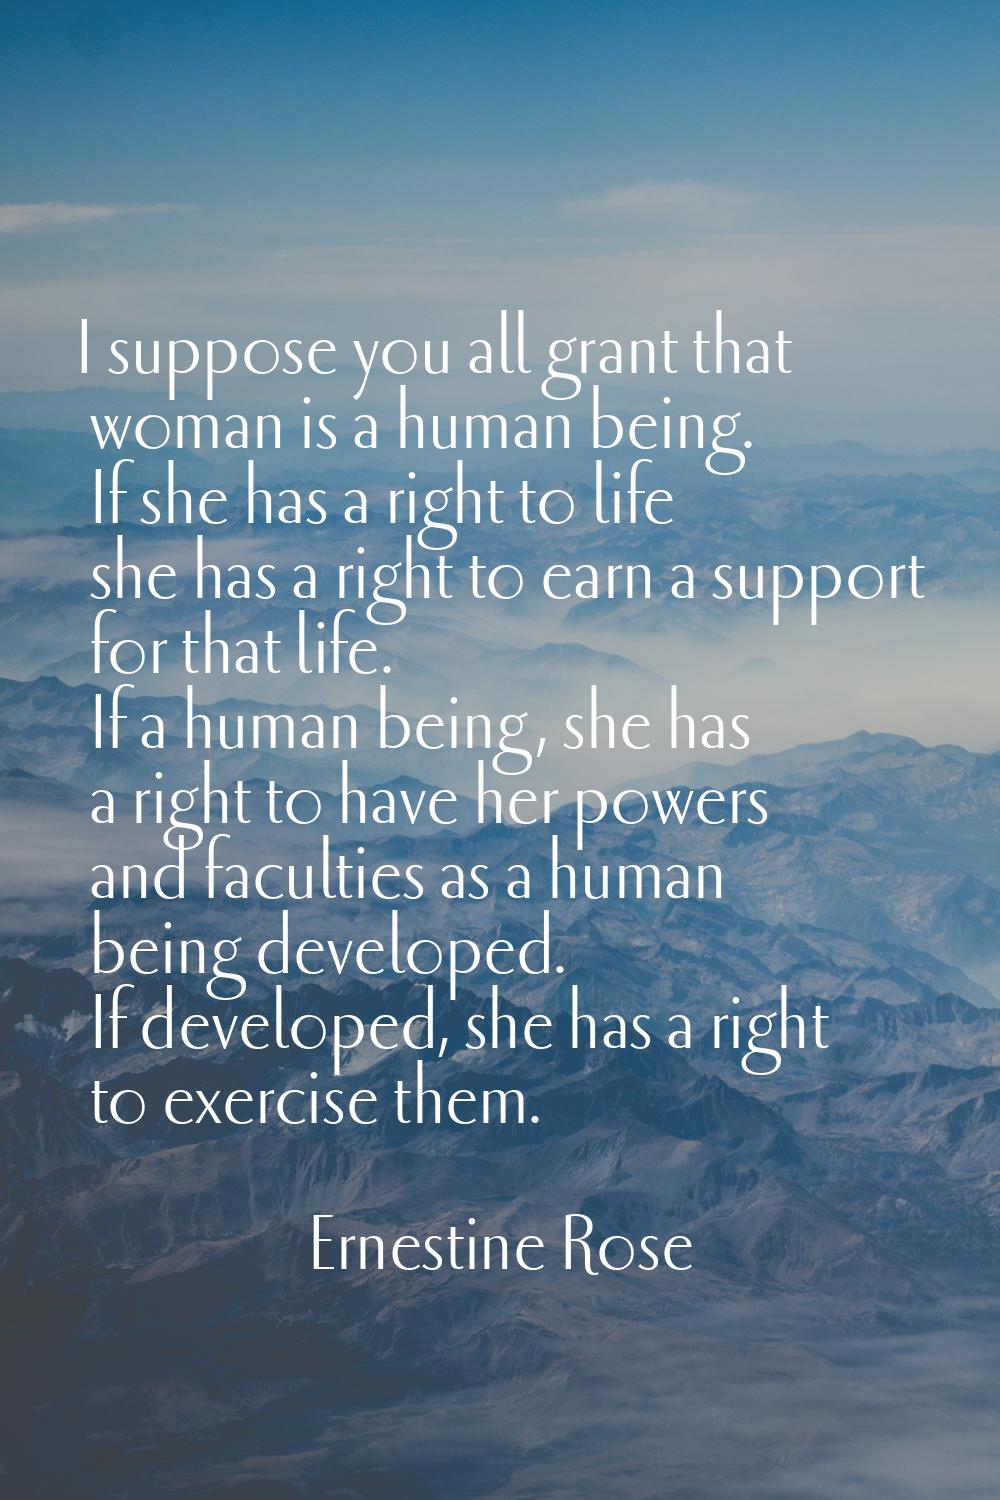 I suppose you all grant that woman is a human being. If she has a right to life she has a right to 